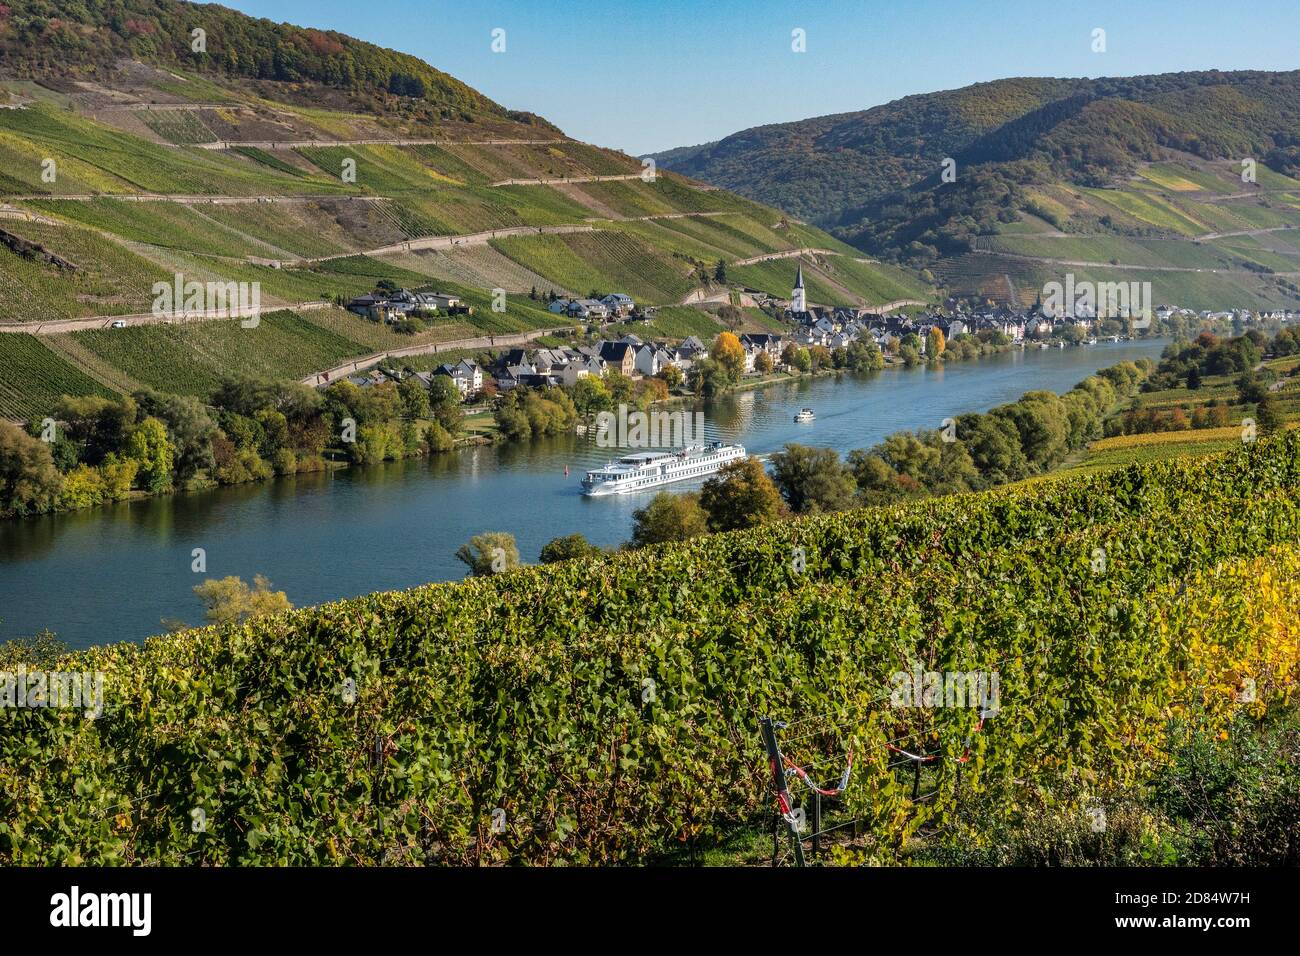 GERMANY, Mosel River. Wine growing is the dominant agriculture along the Mosel Valley like here around Merl Stock Photo